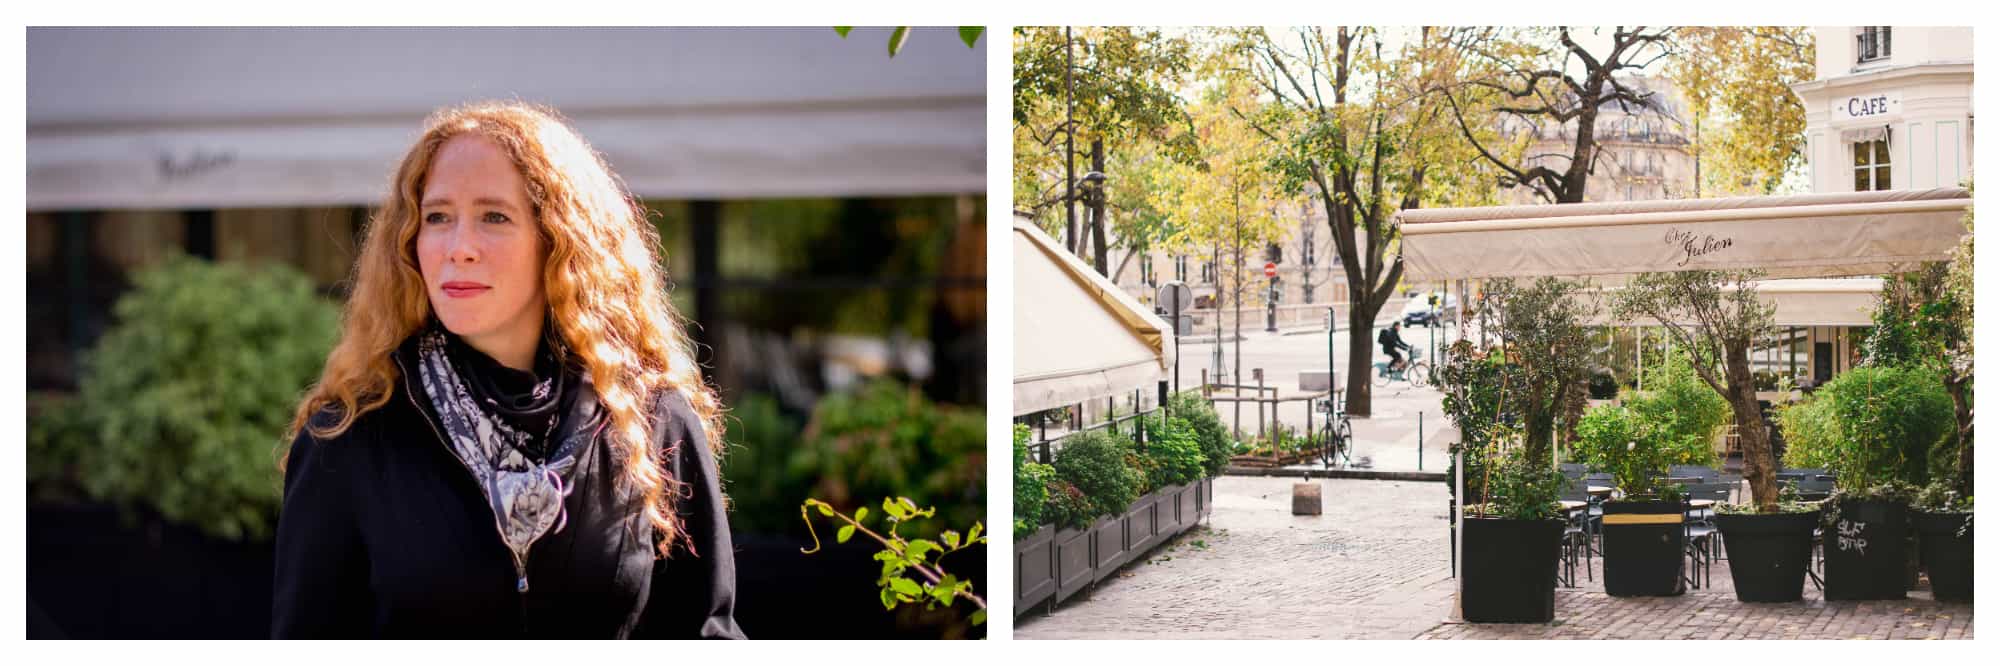 On left: Jane Bertch, founder of La Cuisine Paris cooking school, enjoys a sunny fall afternoon in the streets of Paris. On right: A quiet moment at rue des Barres, a small side street by the Seine in Paris' 4th arrondissement. 